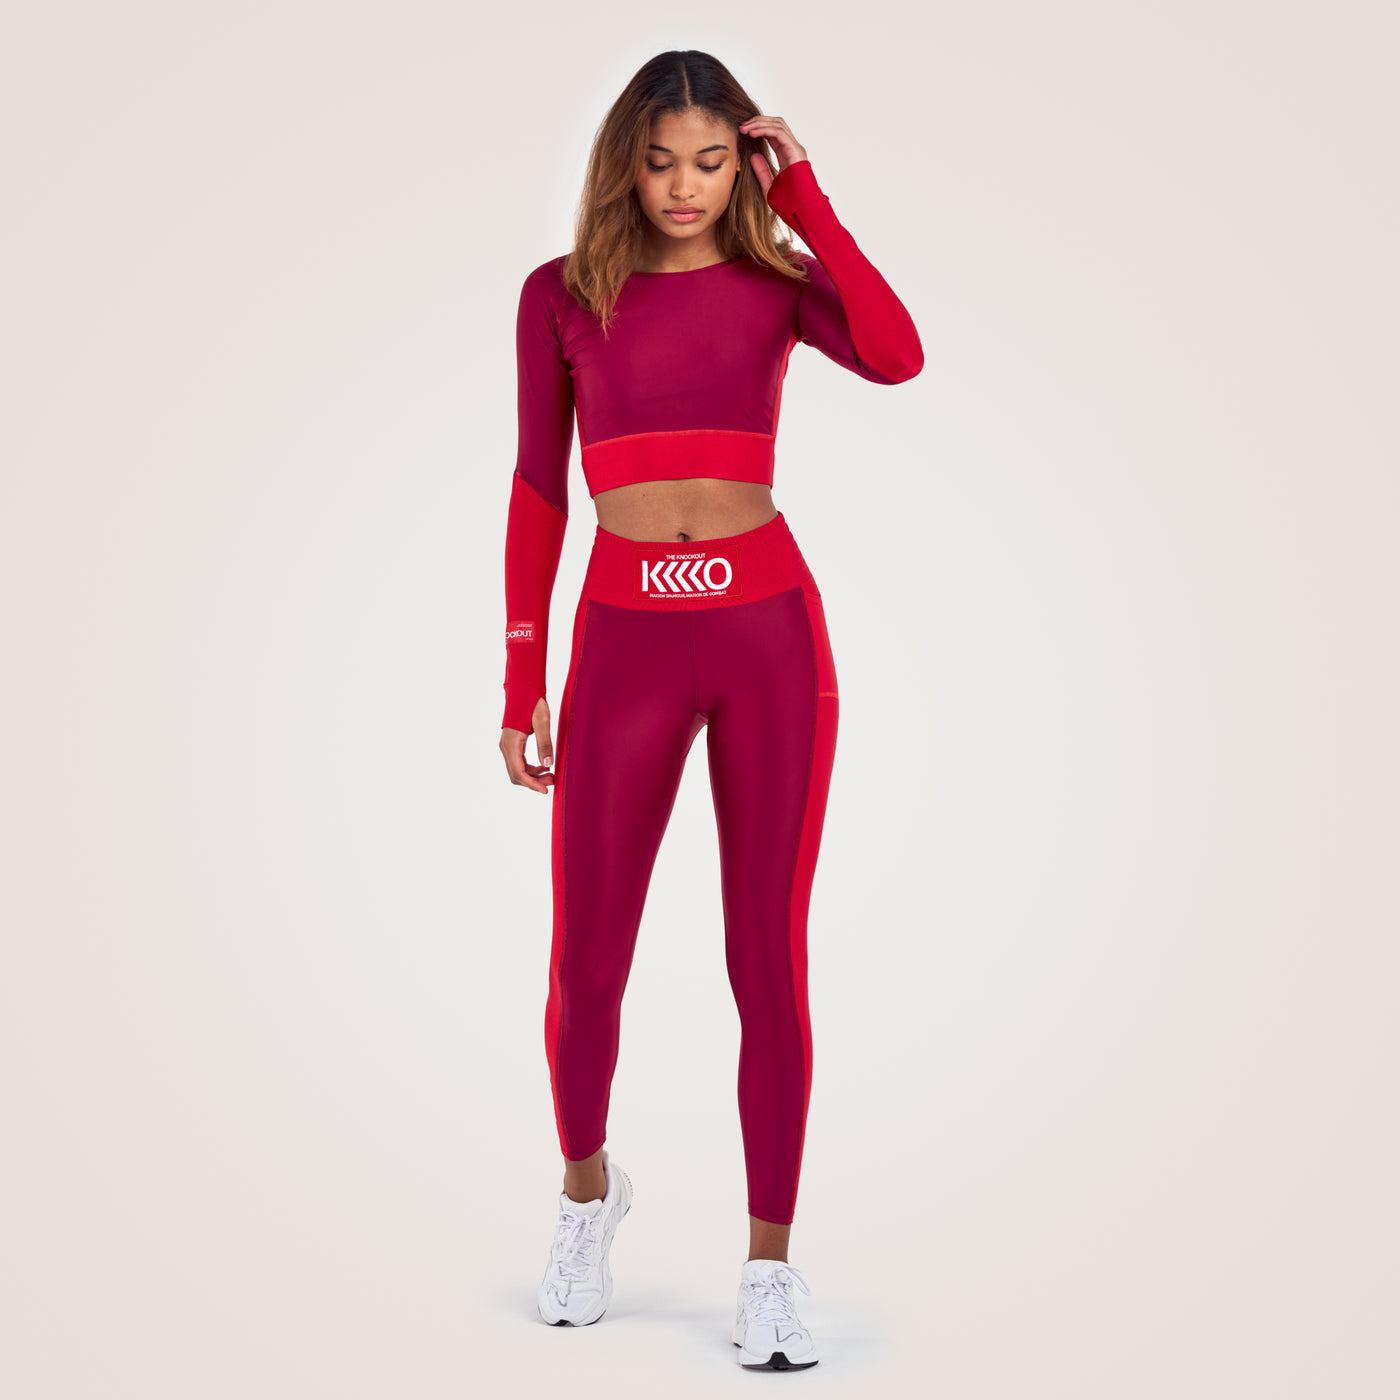 The Knockout Paris cropped long sleeved top in red